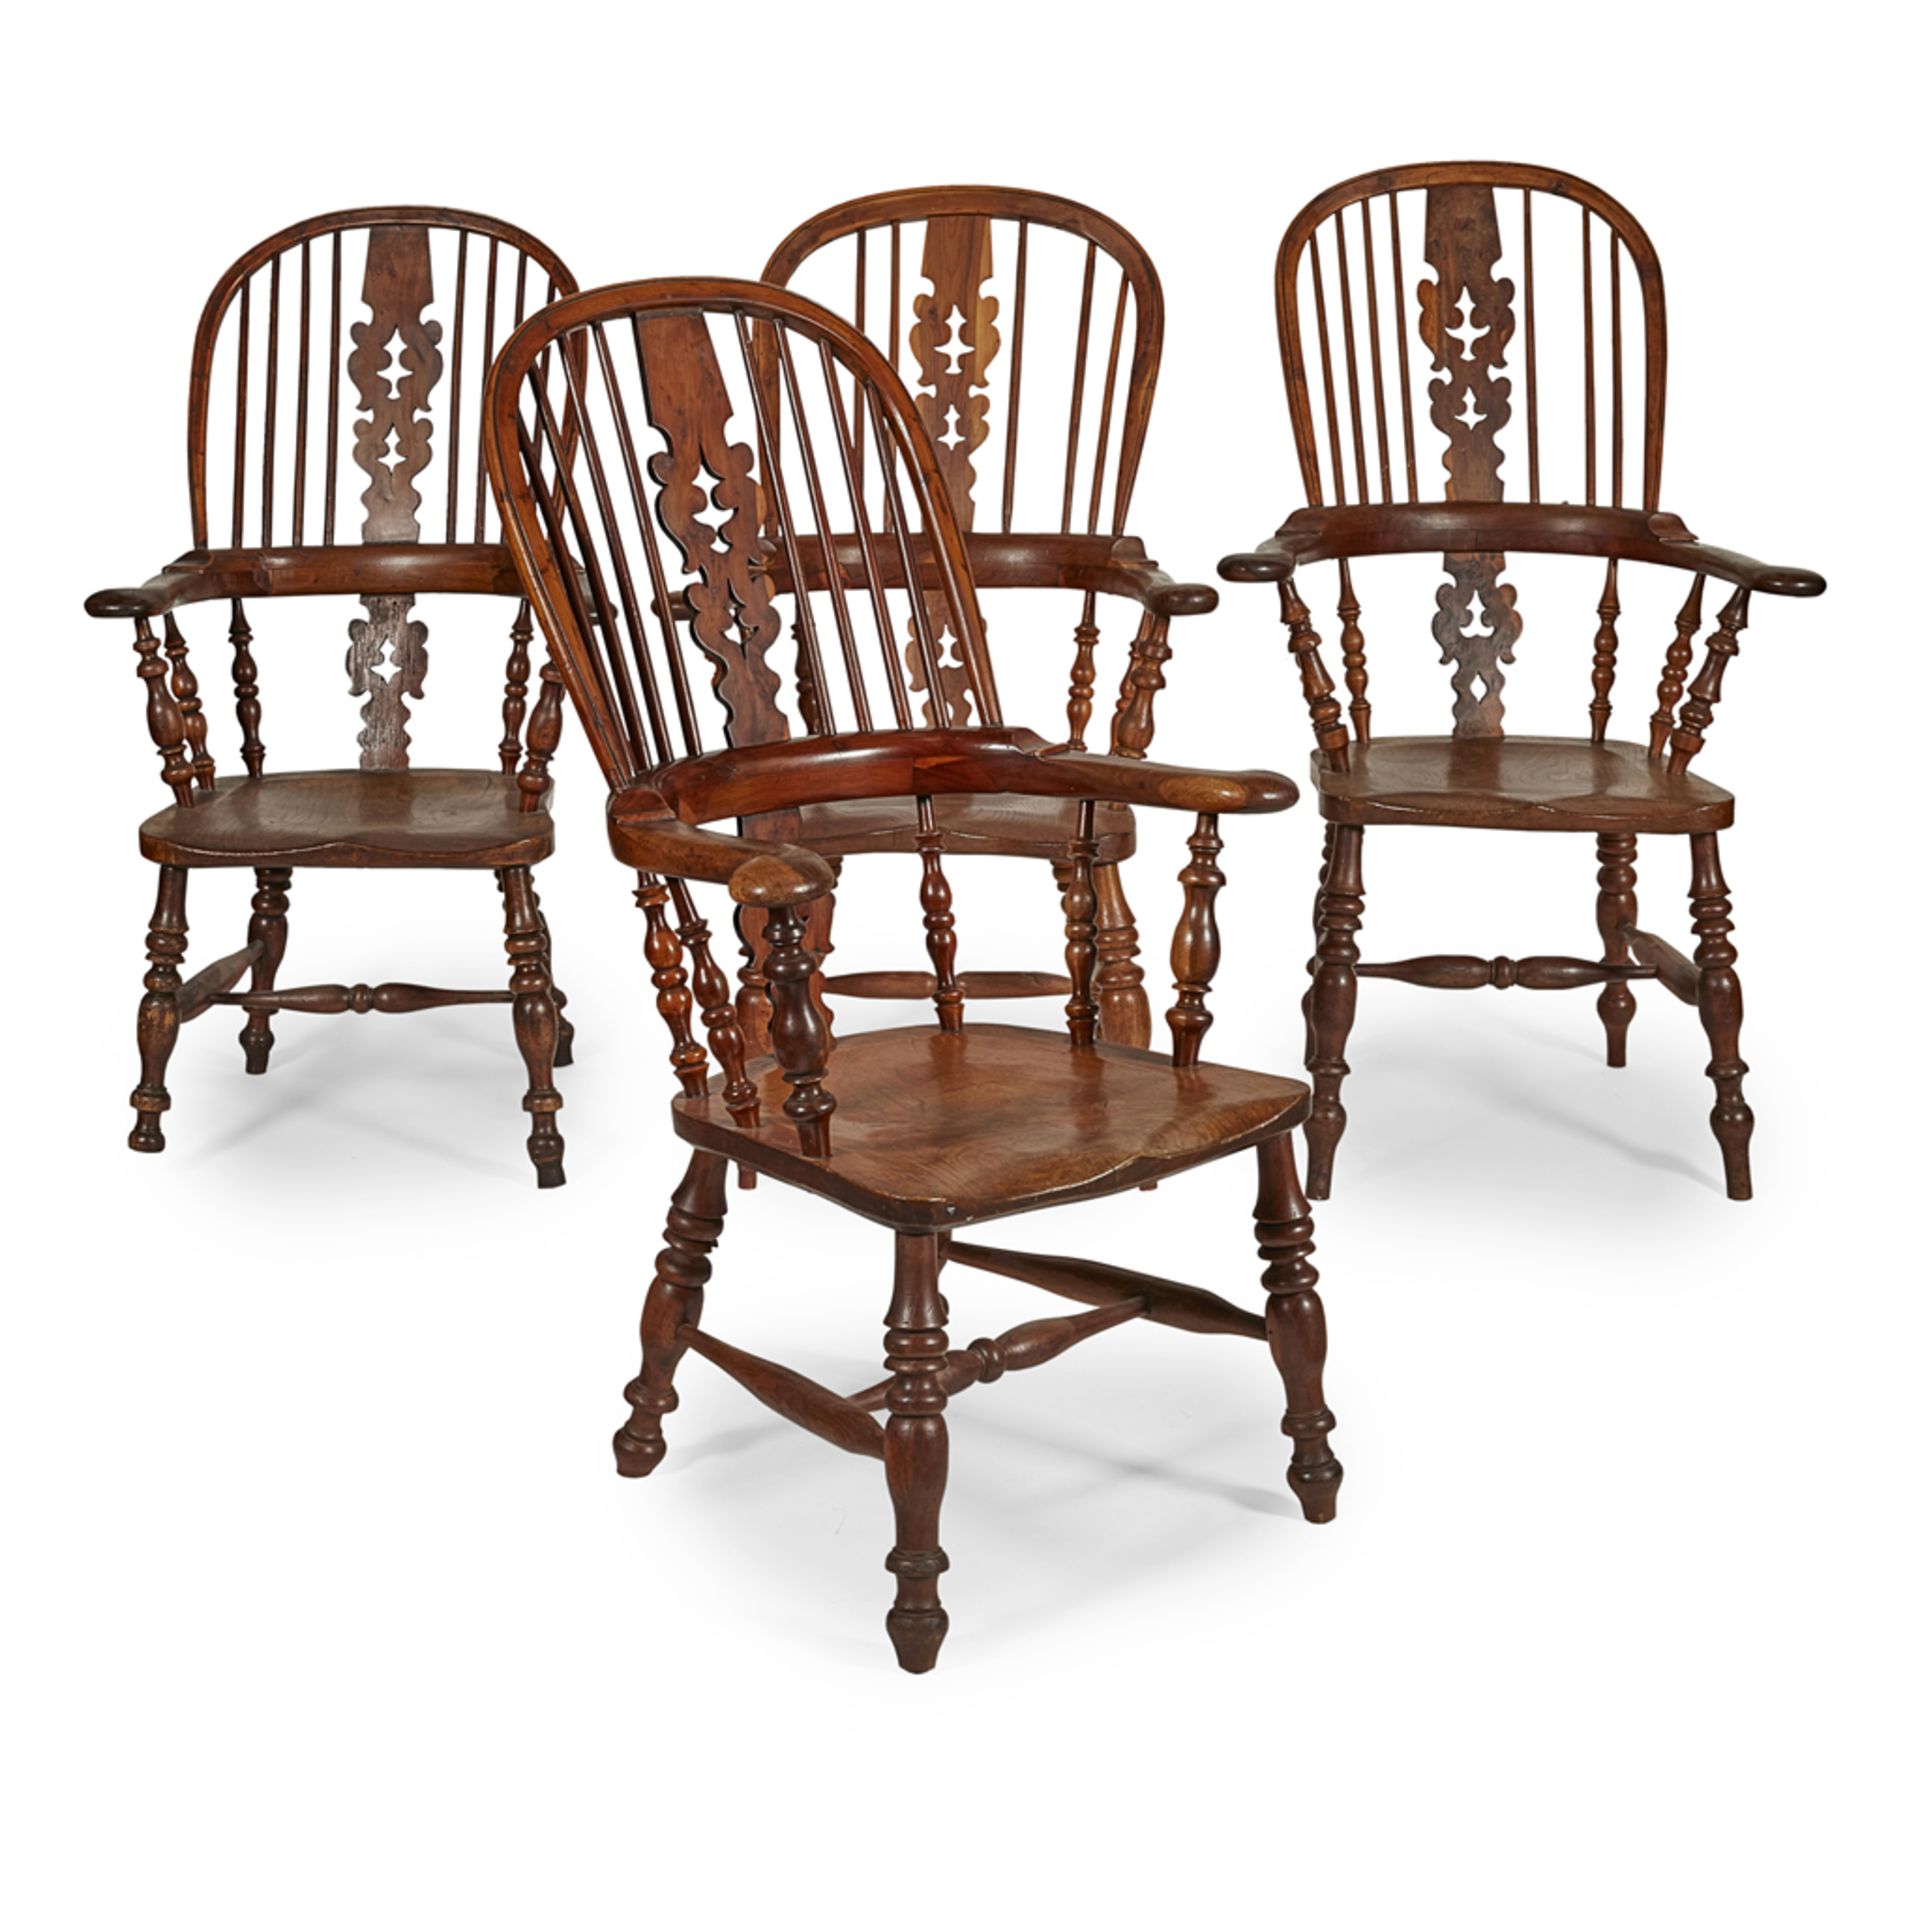 MATCHED SET OF FOUR YEW AND ELM WINDSOR ARMCHAIRS EARLY 19TH CENTURY with hoop backs and pierced